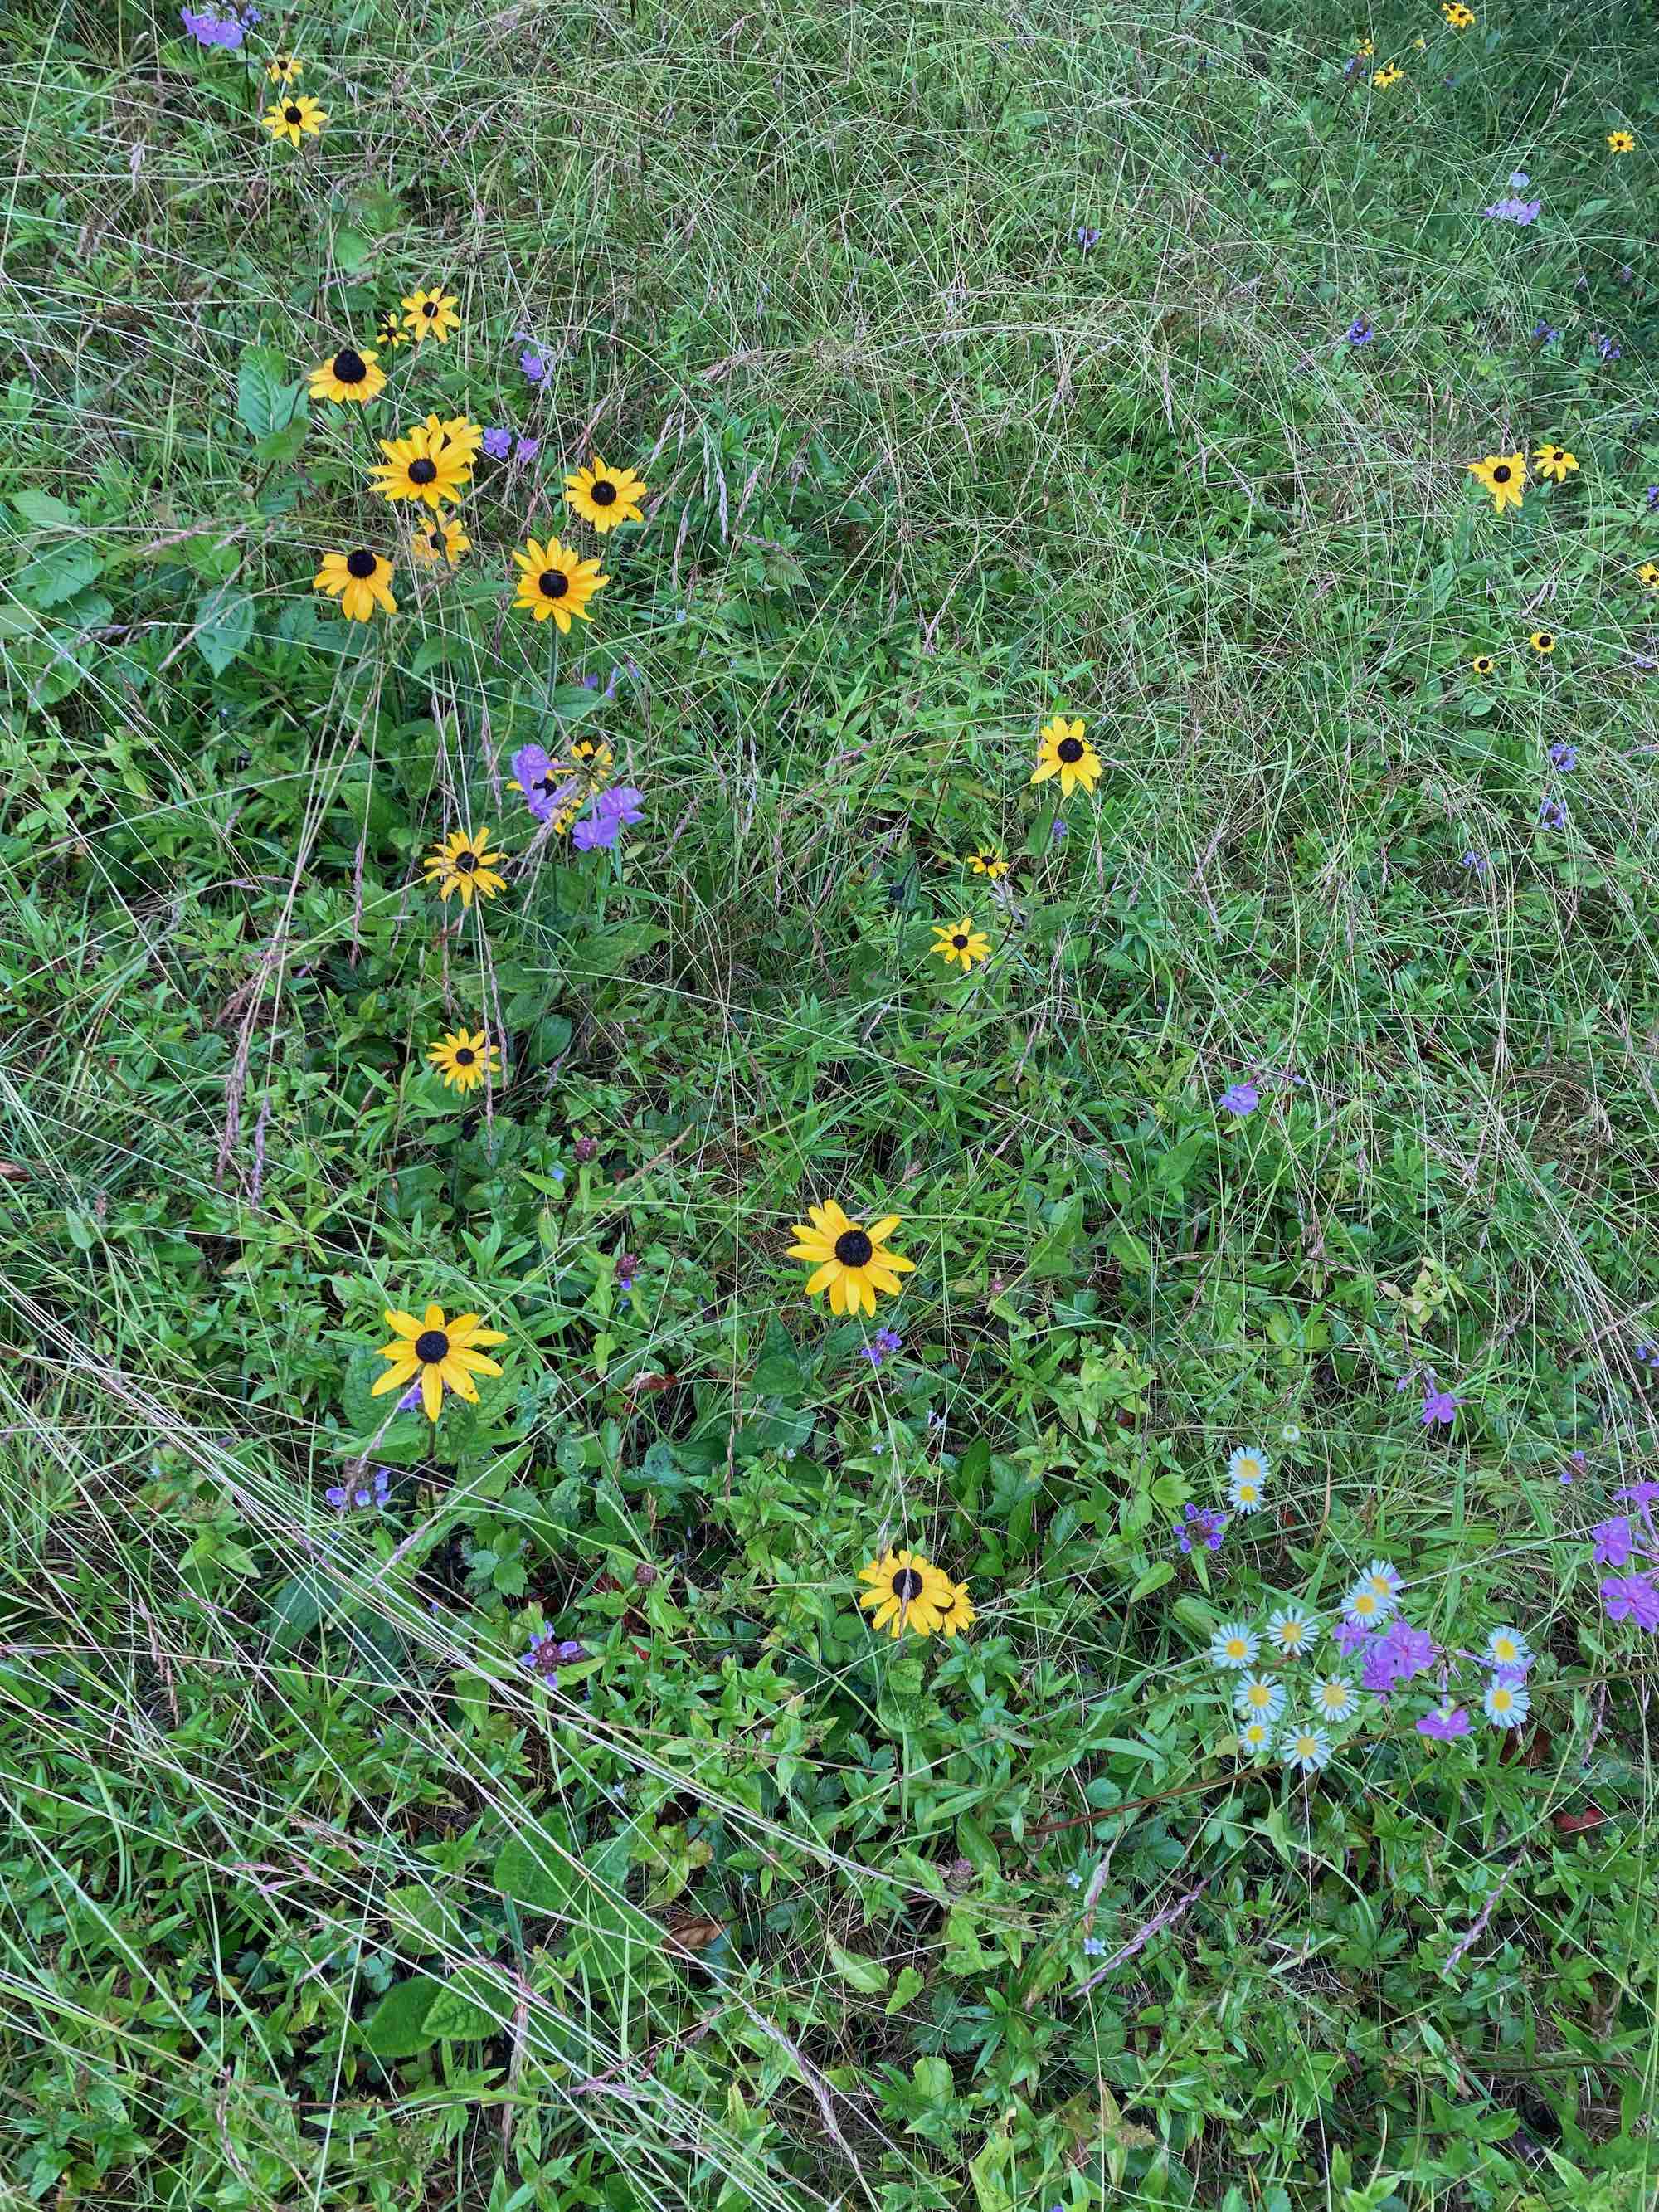 The Scientific Name is Rudbeckia hirta. You will likely hear them called Black-eyed Susan, Black-eyed Coneflower. This picture shows the A field of wildflowers along the Blue Ridge Parkway. of Rudbeckia hirta